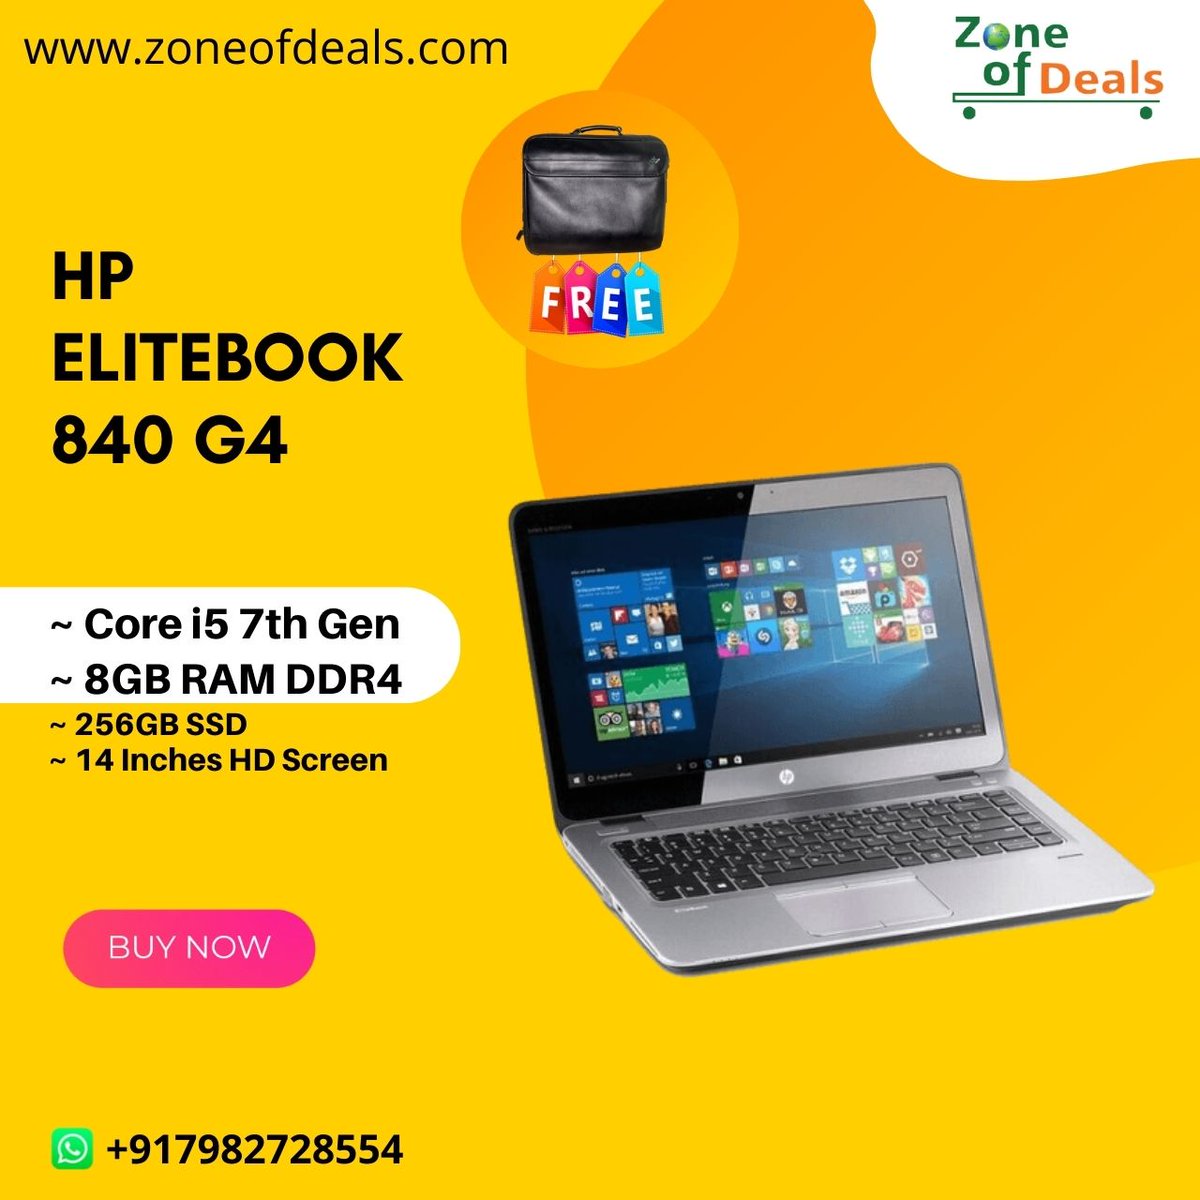 HP EliteBook 840 G4 8GB - 256GB Refurbished Laptop - Excellent New Condition. 
COD Also Available.
Safe Shipping Through Reputed Courier Services.
#refurbishedlaptops #laptopsforstudents #delllaptops #corei7 #workstations #laptopsunder30000 #graphicscards #dellprecision #dell